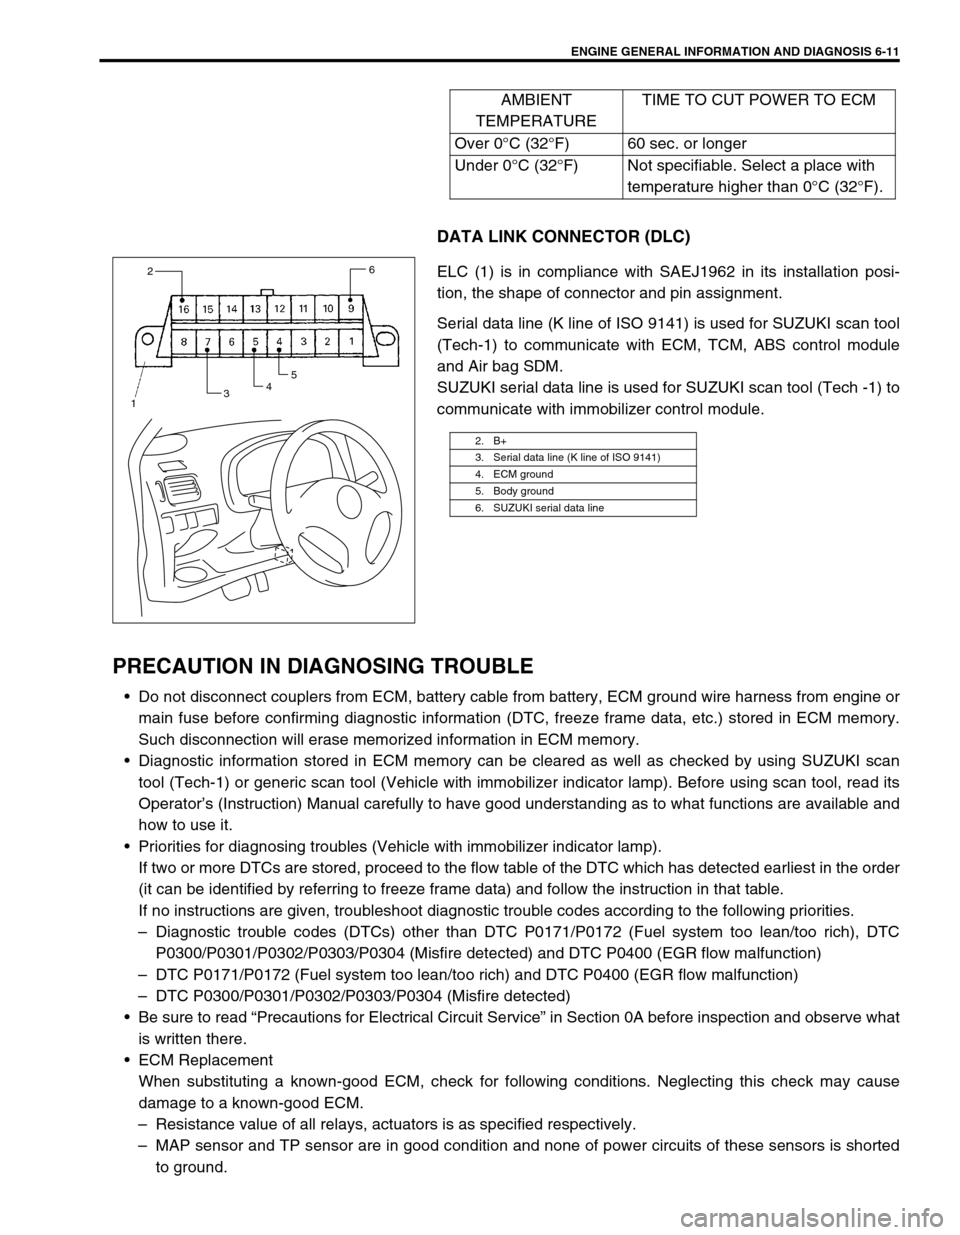 SUZUKI SWIFT 2000 1.G RG413 Service Workshop Manual ENGINE GENERAL INFORMATION AND DIAGNOSIS 6-11
DATA LINK CONNECTOR (DLC)
ELC (1) is in compliance with SAEJ1962 in its installation posi-
tion, the shape of connector and pin assignment.
Serial data li